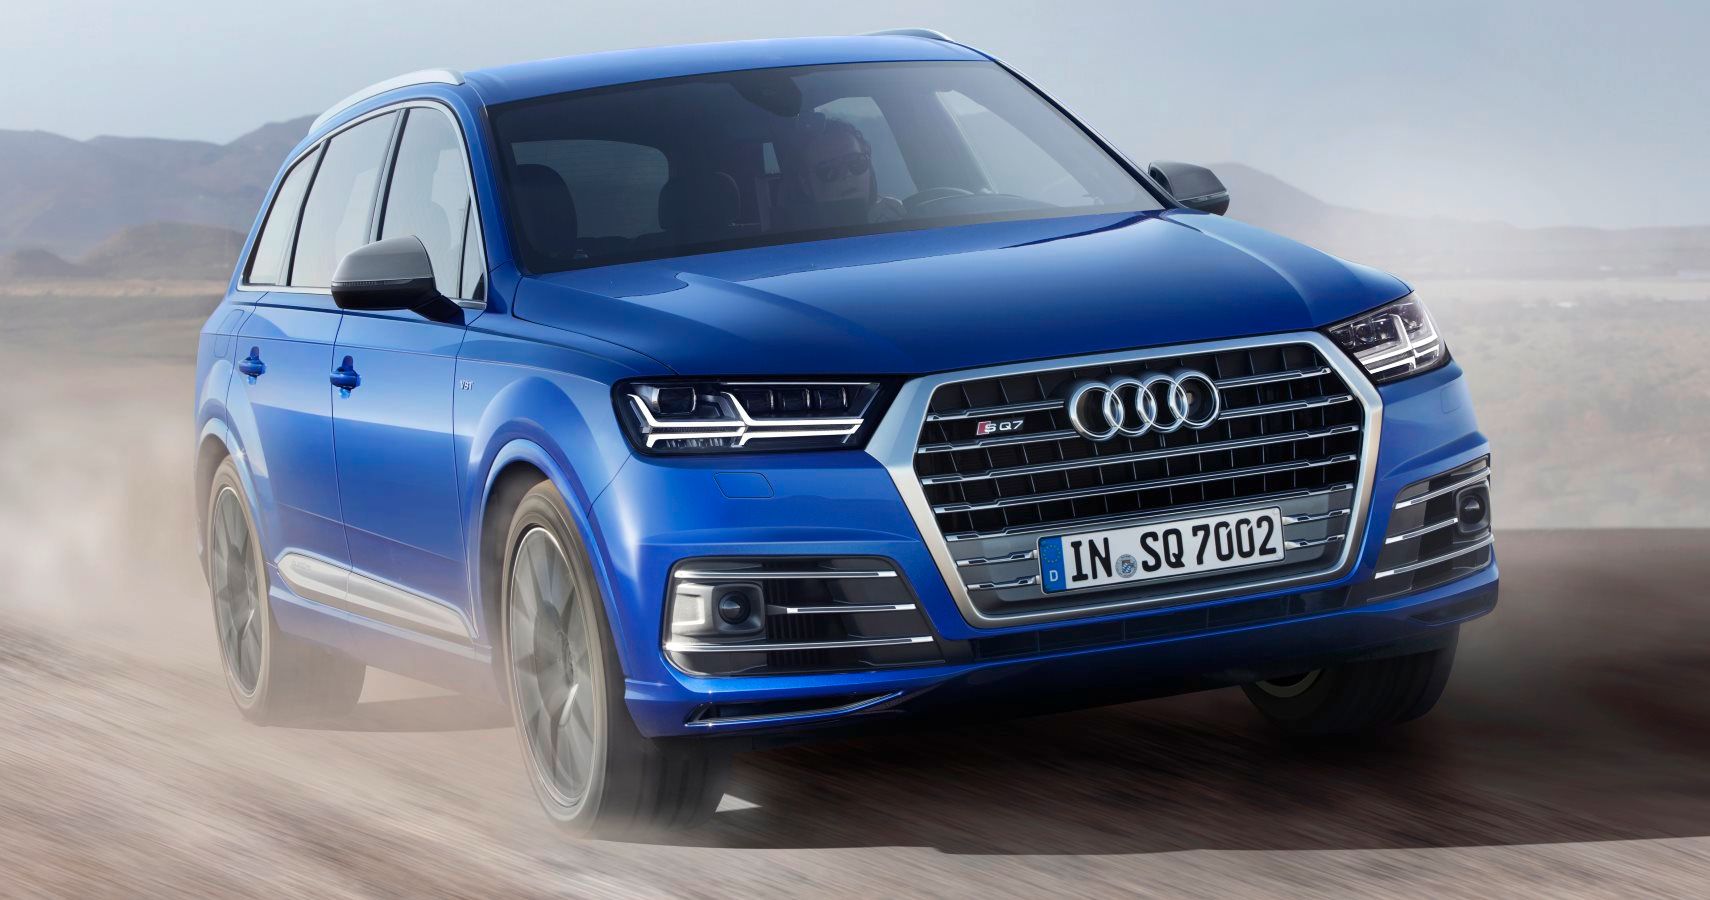 Watch The Audi SQ7's Launch Control As It Accelerates